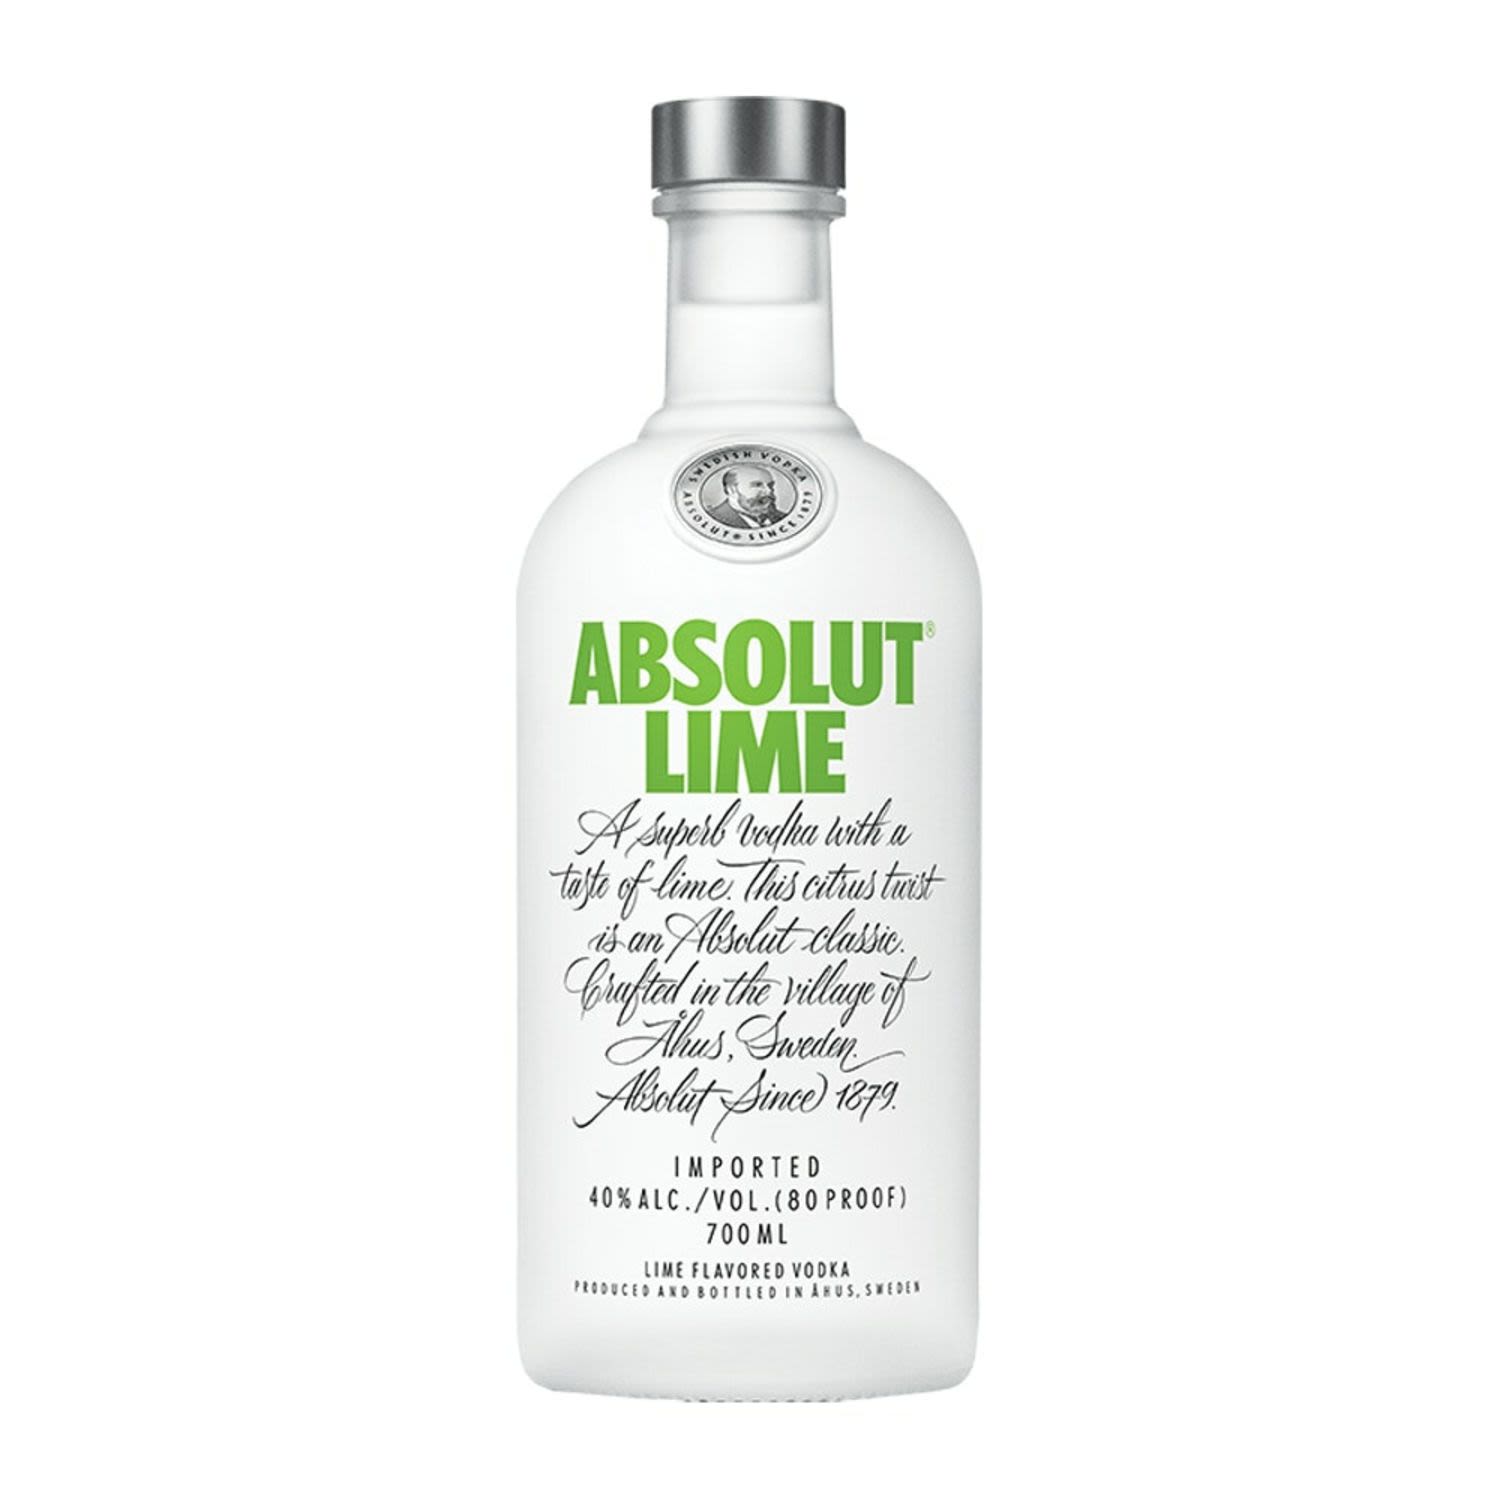 Absolut Lime is made exclusively from natural ingredients, and doesn’t contain any added sugar. To put it short and simple: Absolut Lime is smooth, rich and very fresh with a distinct note of freshly pressed lime and a slightly sweet and fruity finish. New to the family Absolut Lime - just add soda!<br /> <br />Alcohol Volume: 40.00%<br /><br />Pack Format: Bottle<br /><br />Standard Drinks: 22</br /><br />Pack Type: Bottle<br /><br />Country of Origin: Sweden<br />